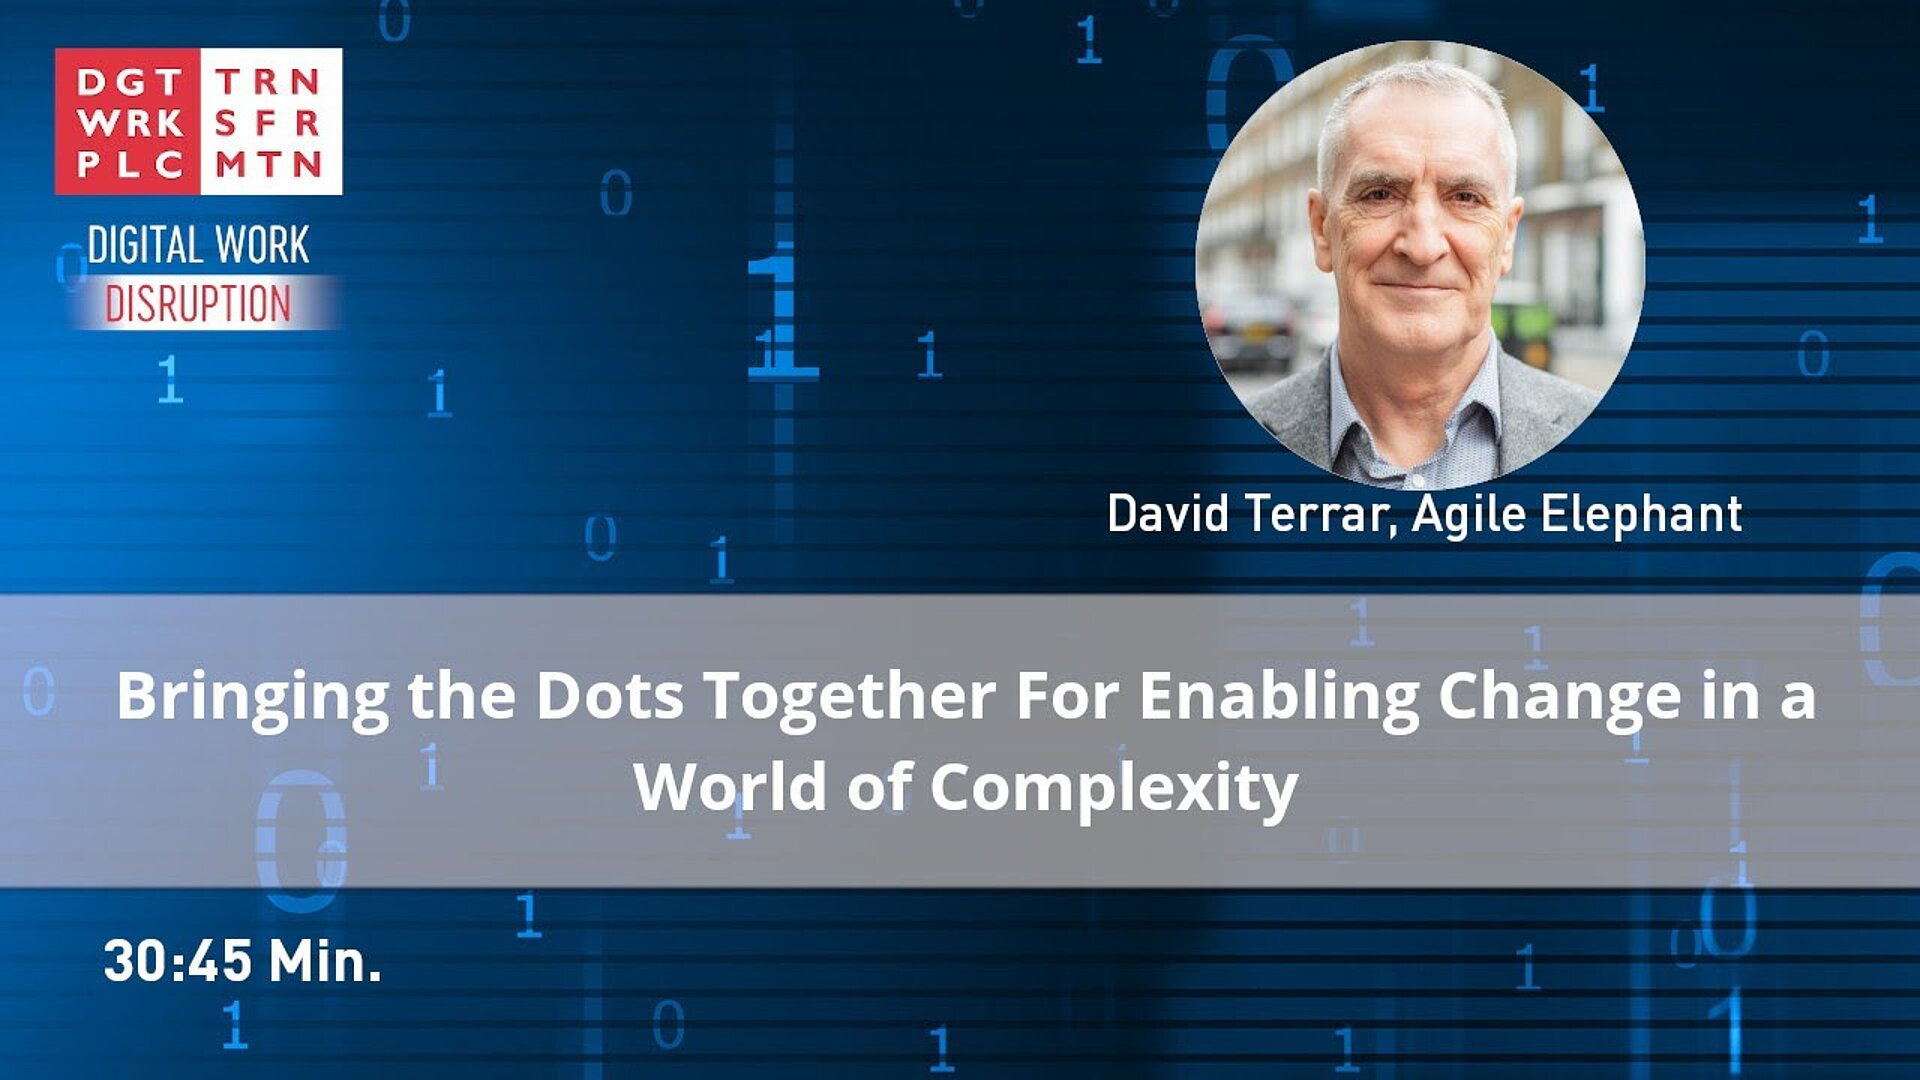 Bringing the Dots Together For Enabling Change in a World of Complexity